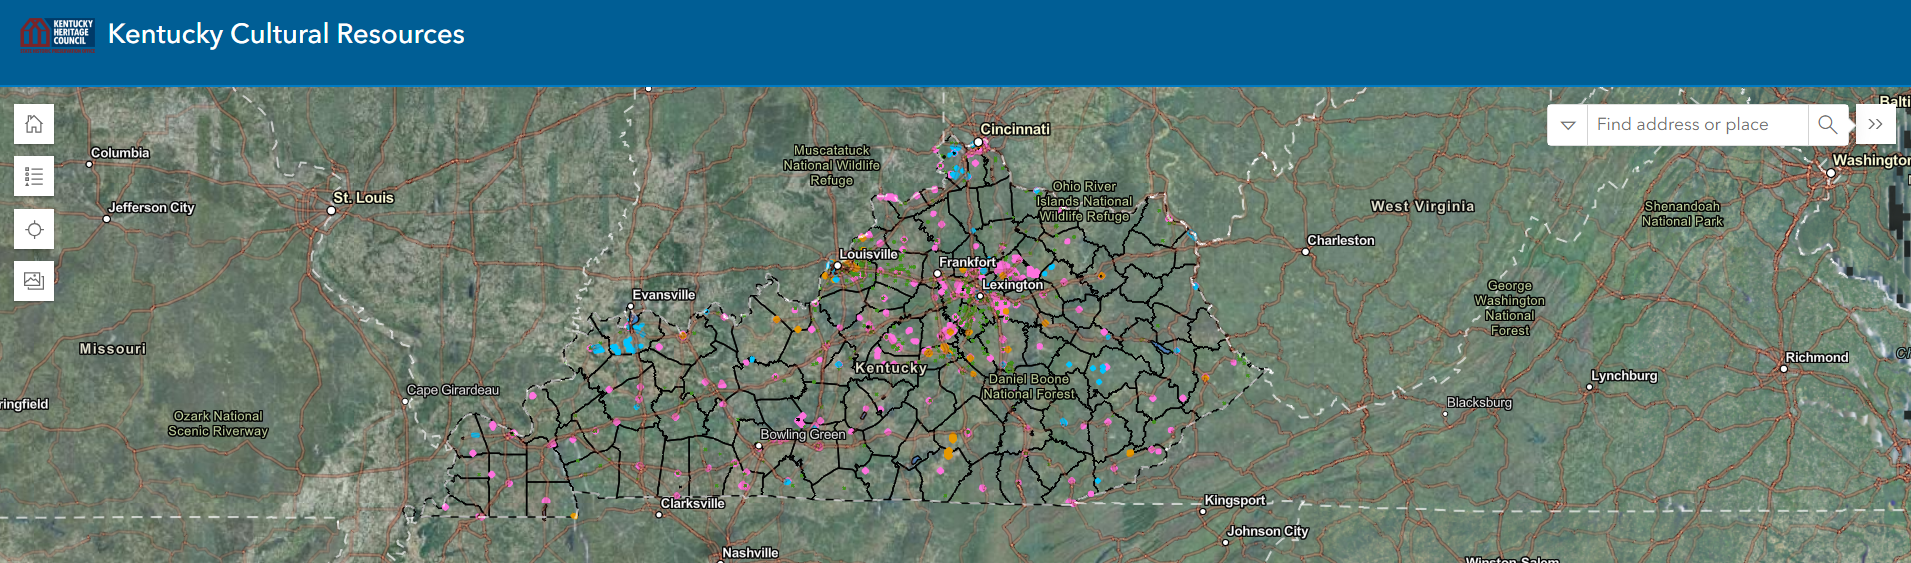 Screenshot from Cultural Resources Interactive Map showing map points around Kentucky that house cultural resources